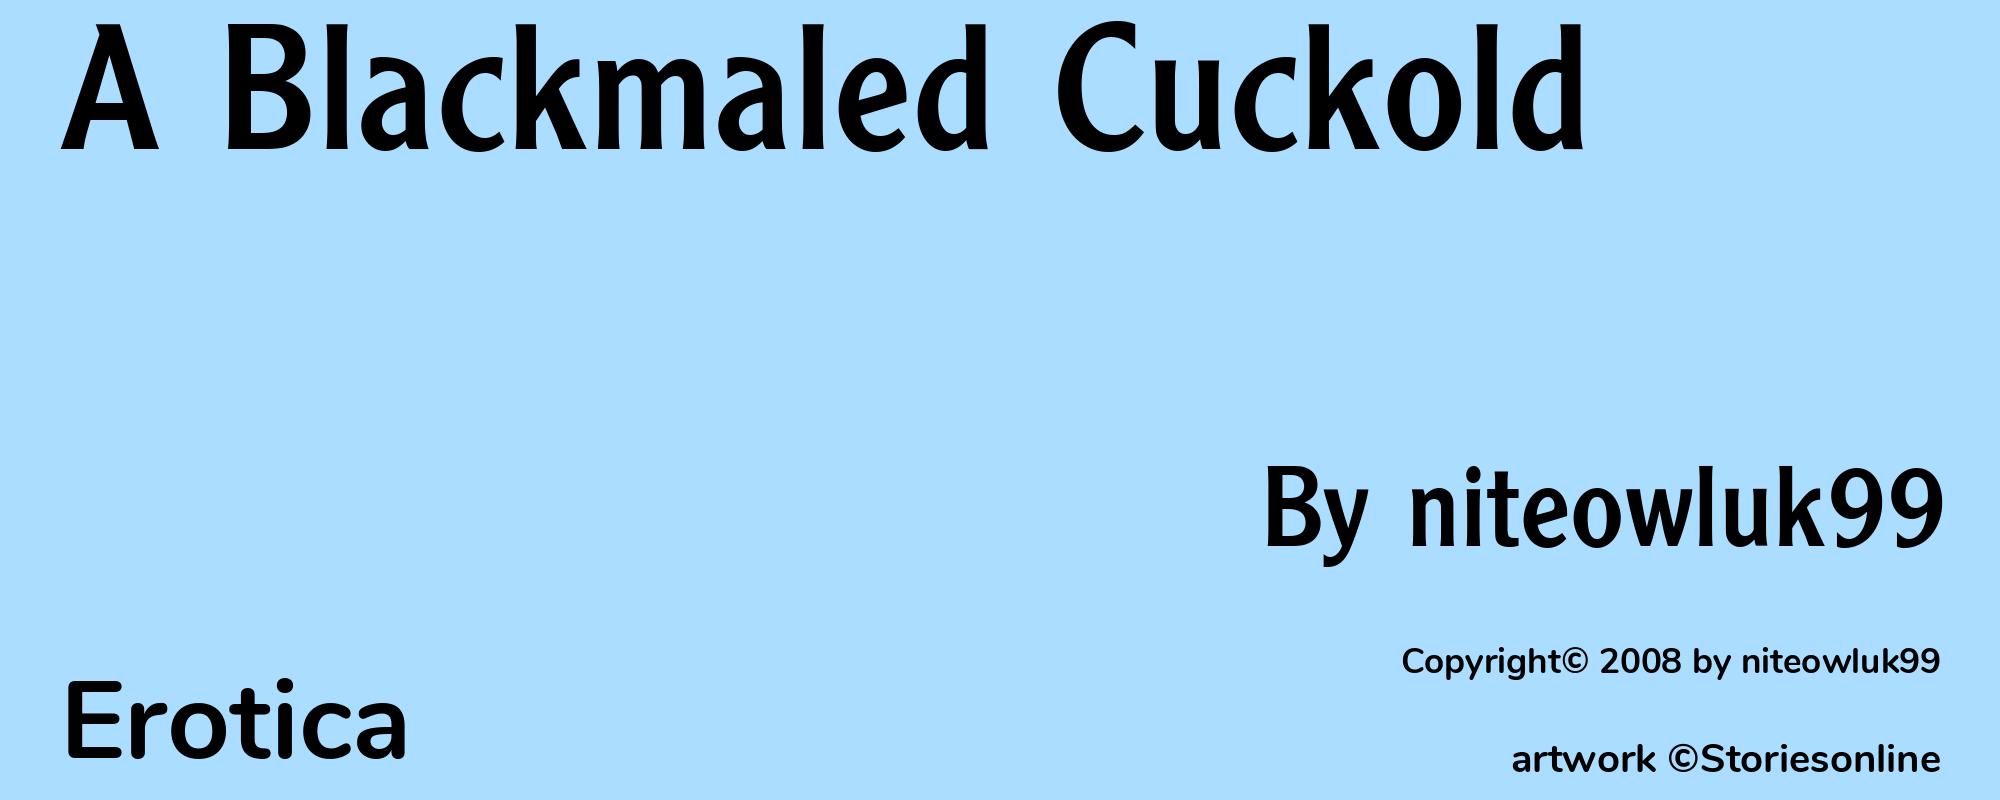 A Blackmaled Cuckold - Cover